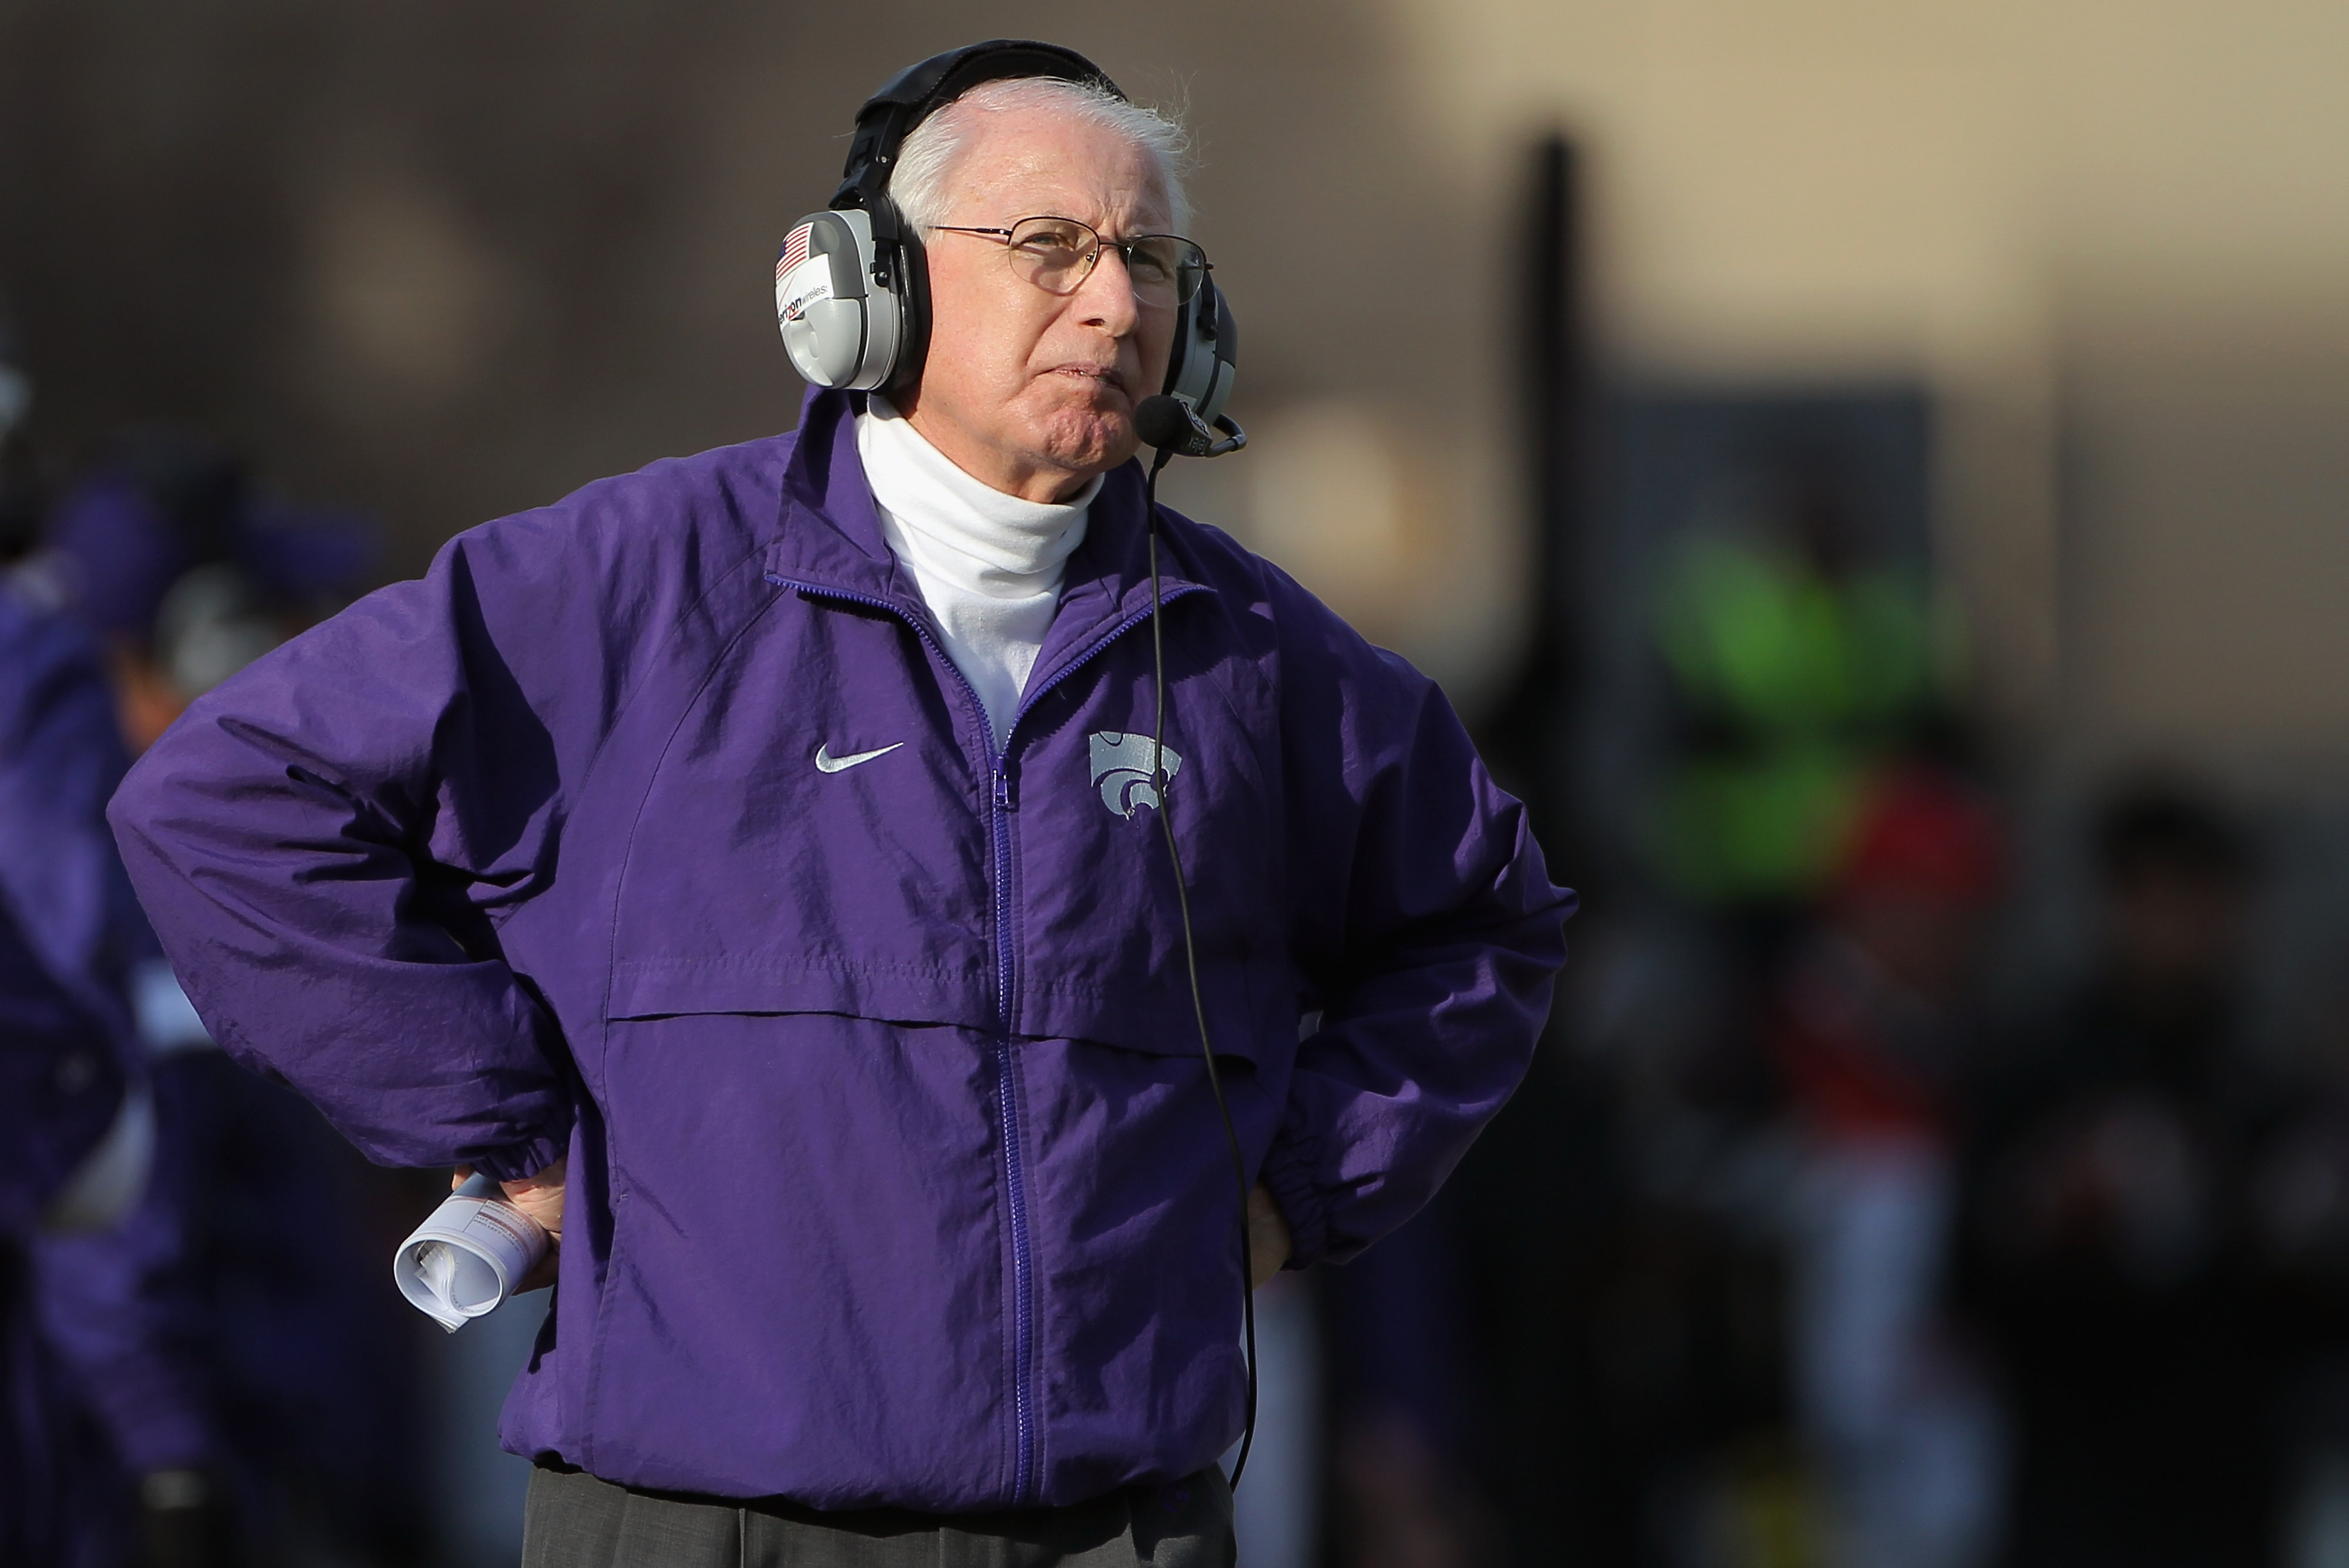 BOULDER, CO - NOVEMBER 20:  Head coach Bill Snyder of the Kansas State Wildcats looks on as he leads his team against the Colorado Buffaloes at Folsom Field on November 20, 2010 in Boulder, Colorado. Colorado defeated Kansas State 44-36.  (Photo by Doug P